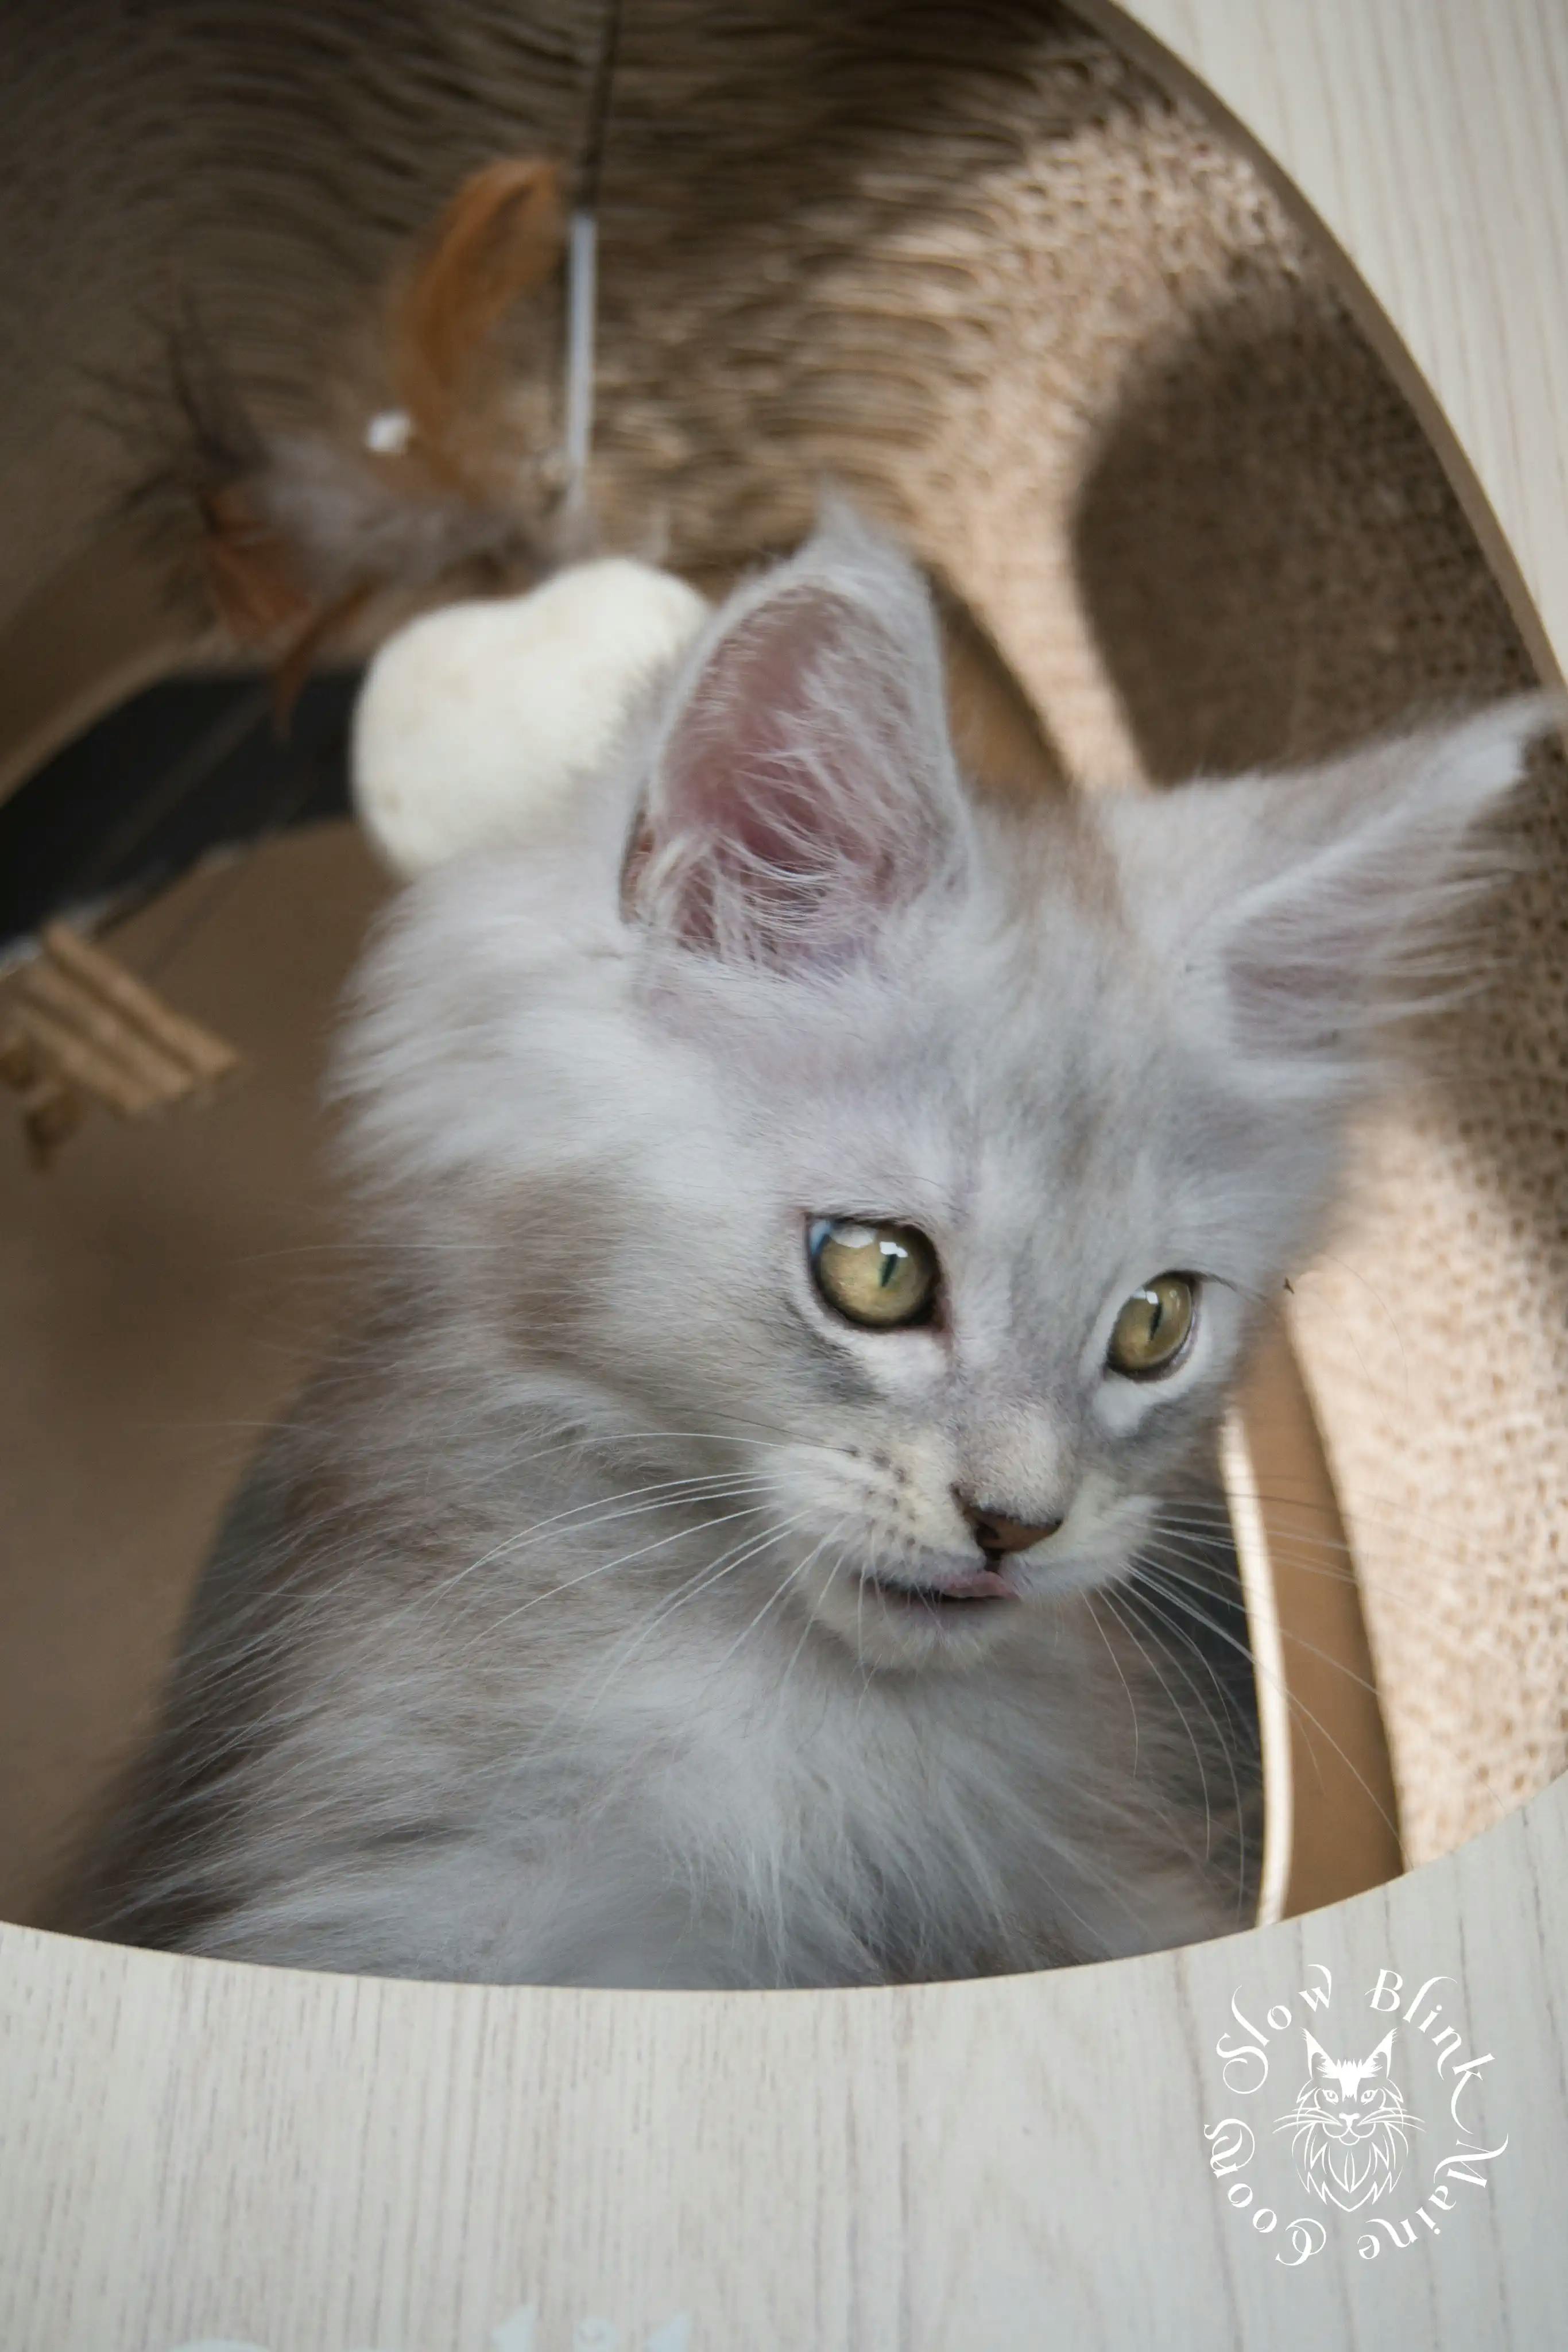 High Silver Maine Coon Kittens > black silver tabby maine coon kitten | ems code ns 22 23 24 25 | slowblinkmainecoons | 586